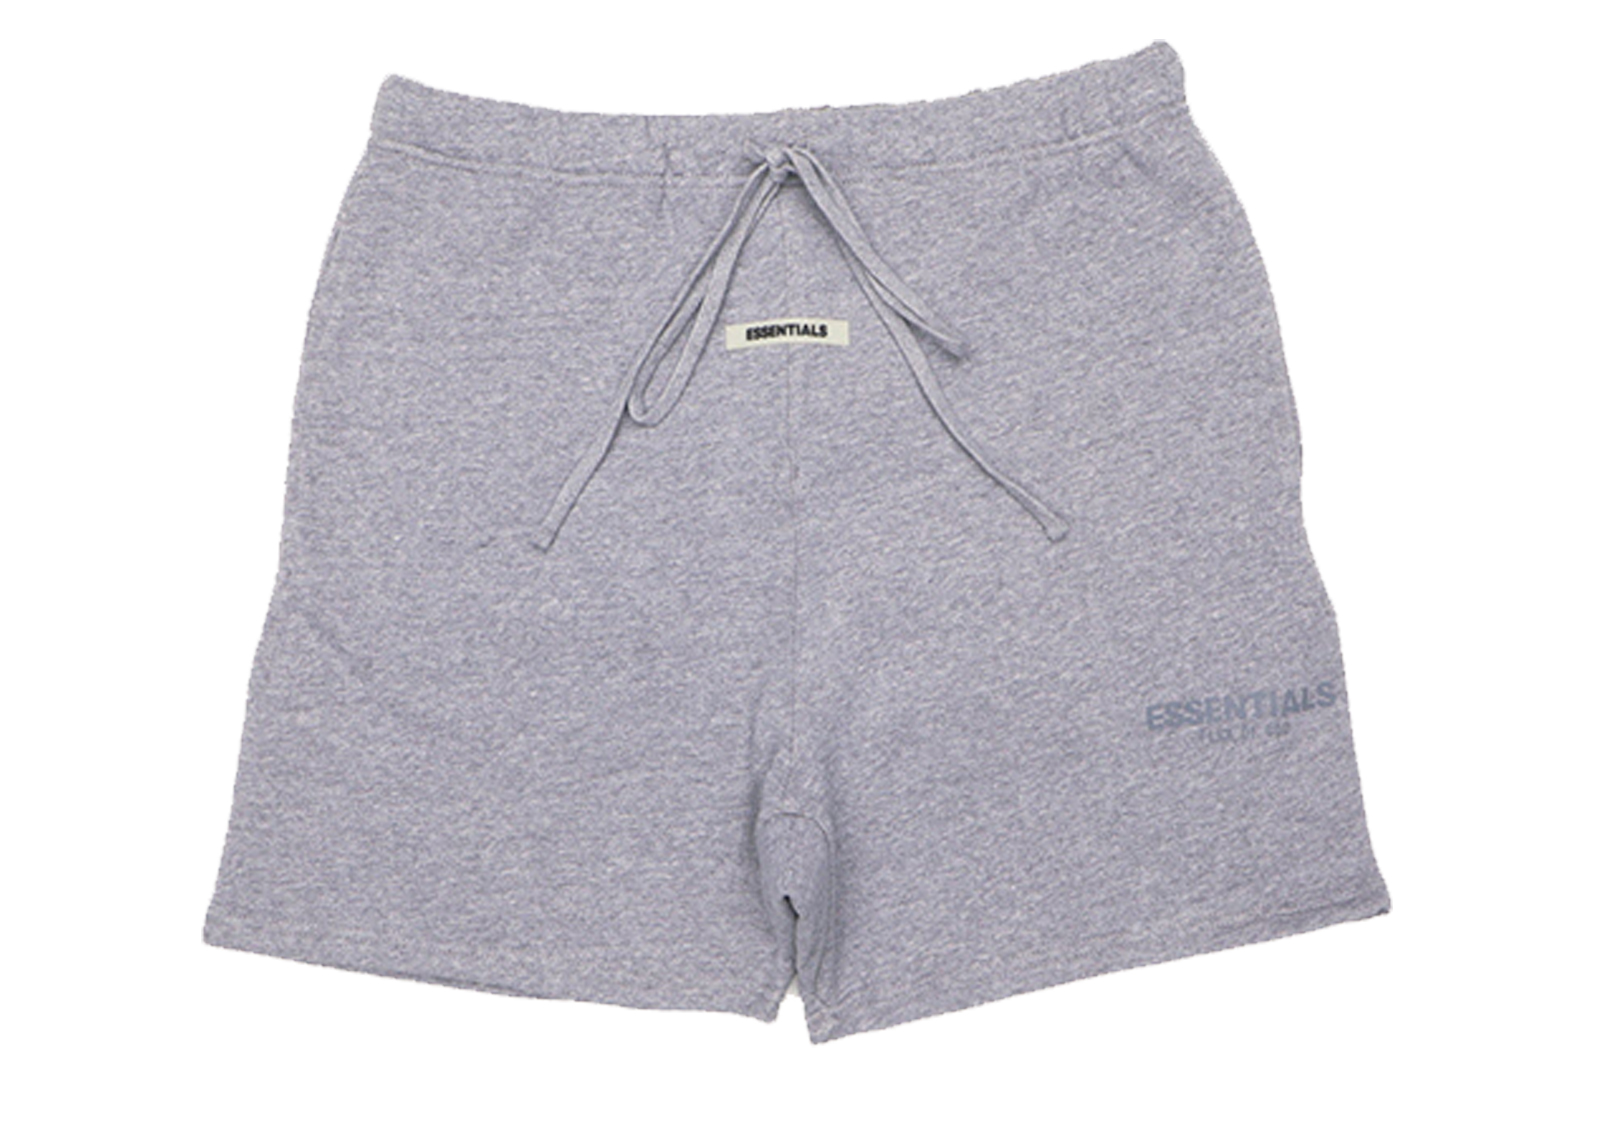 Fear Of God Essentials Graphic Sweat Shorts Online, 53% OFF | www 